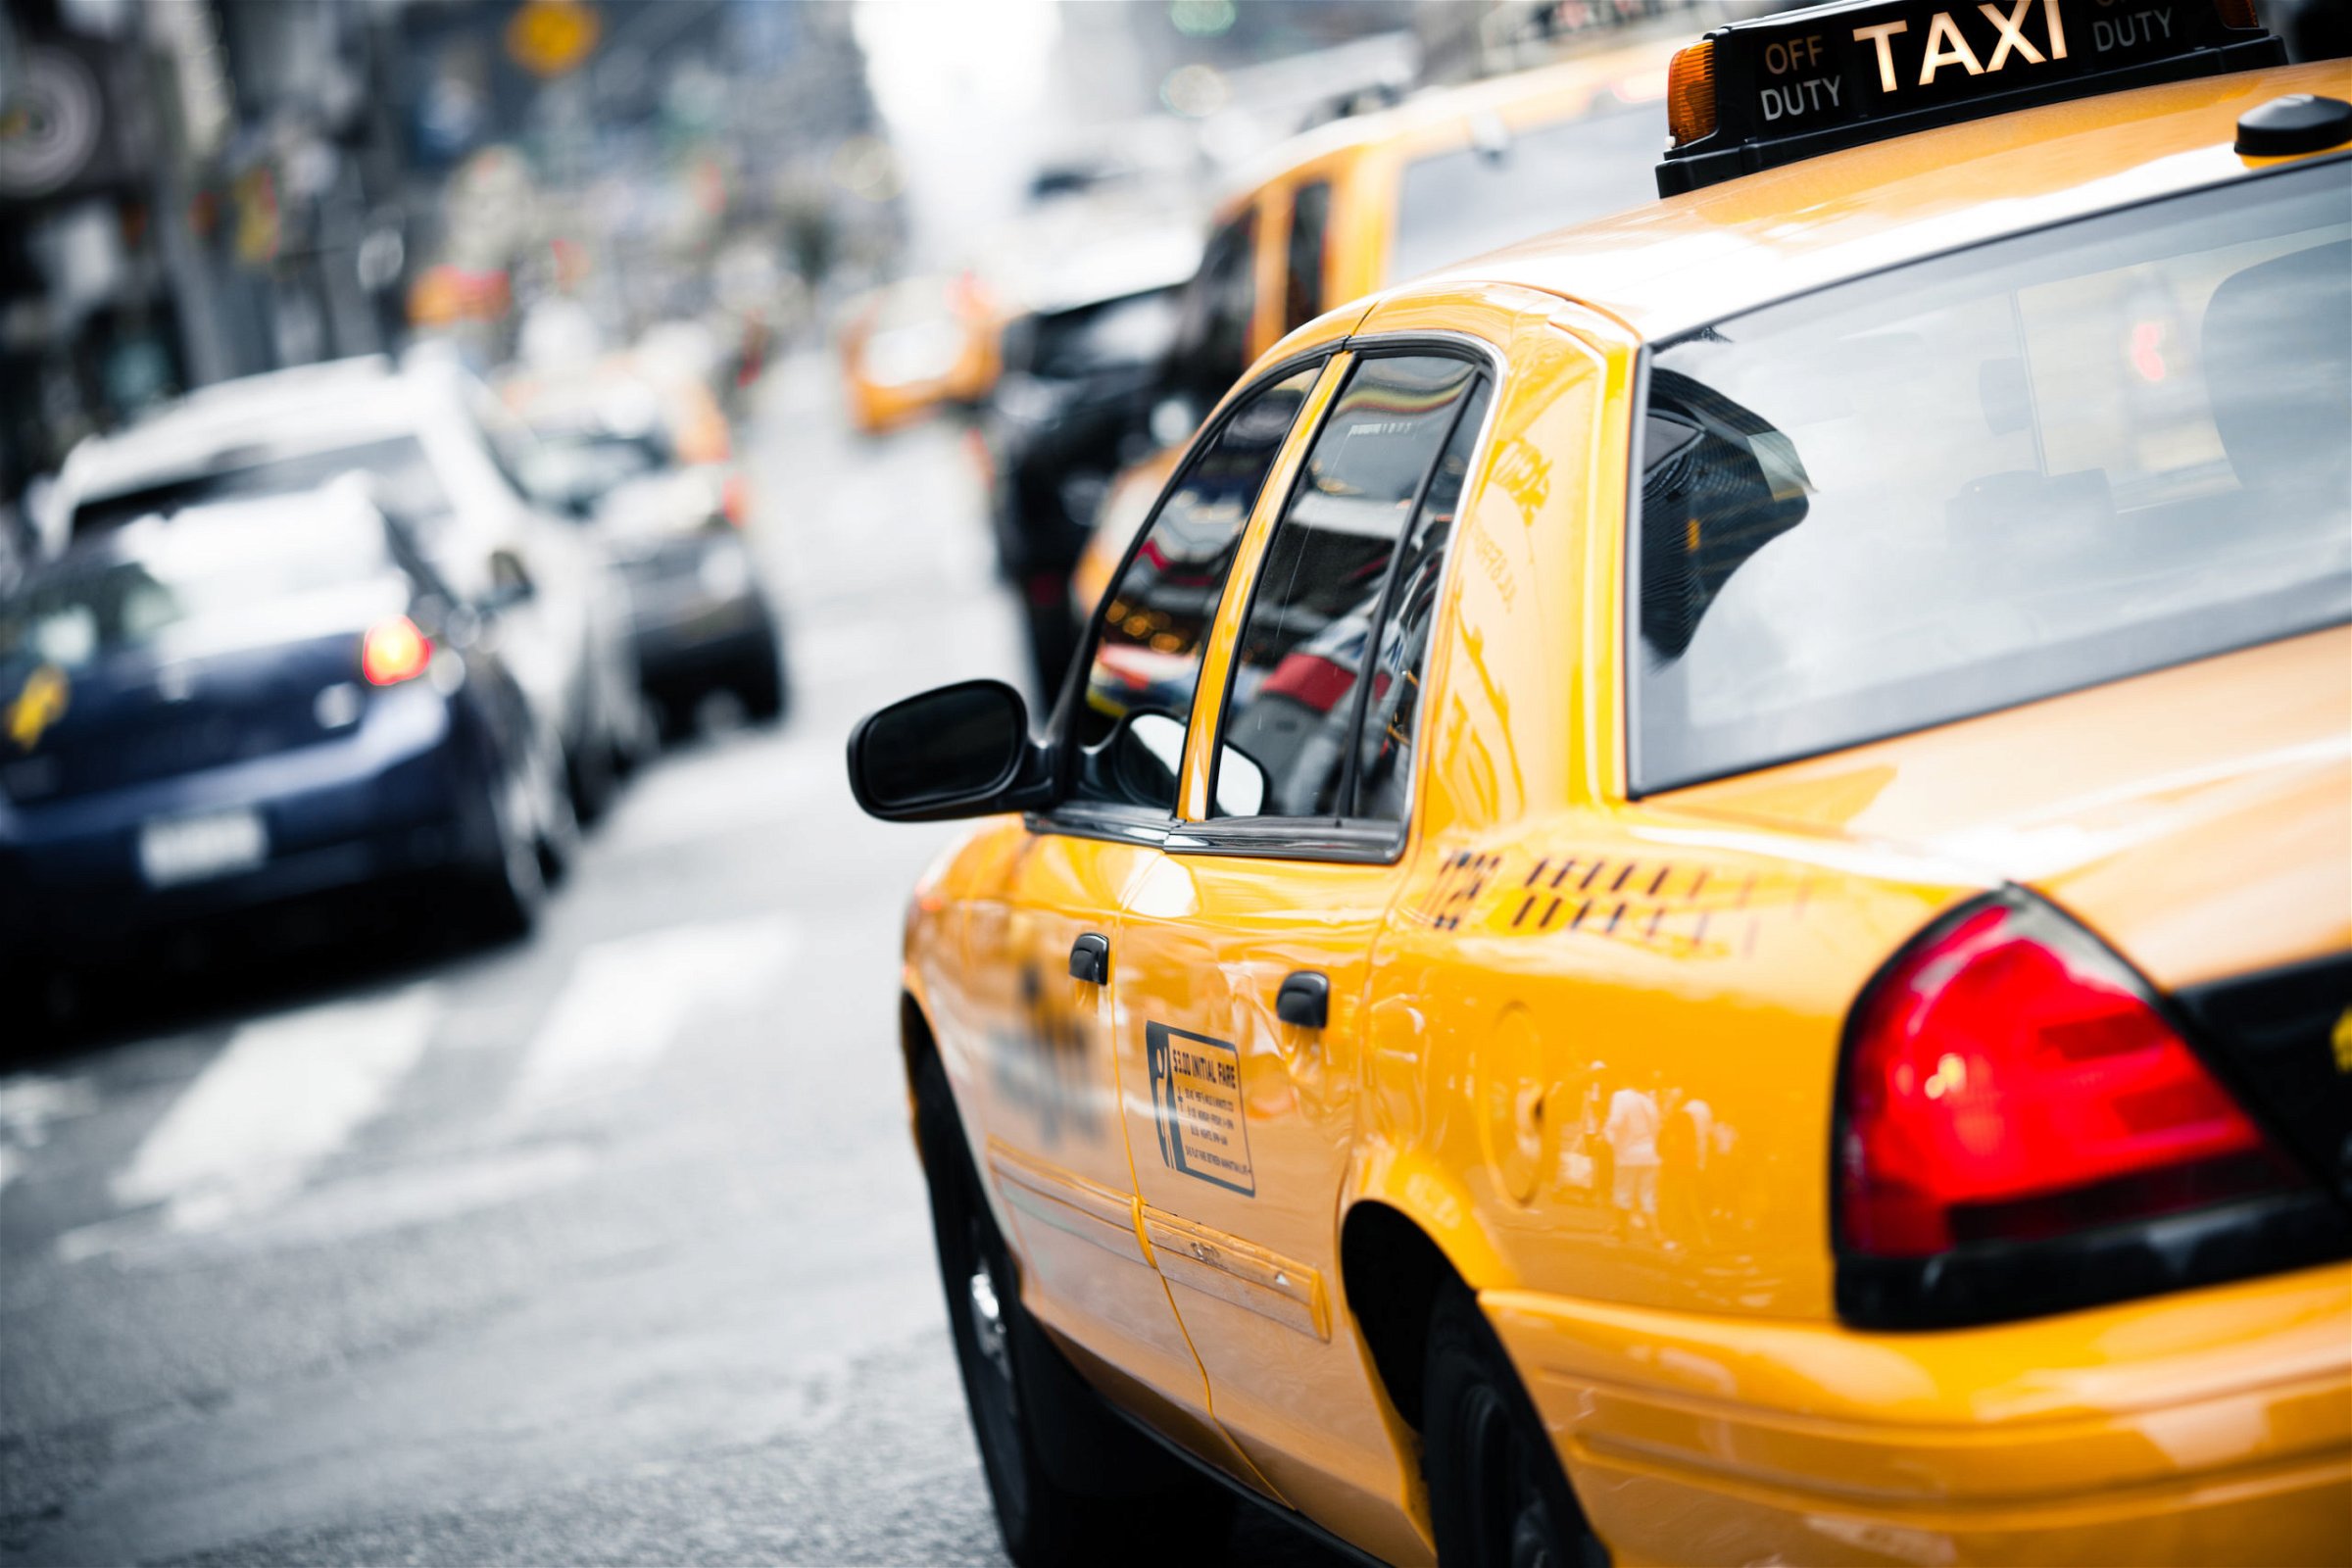 What You Need to Know About Taxi Accidents in New York